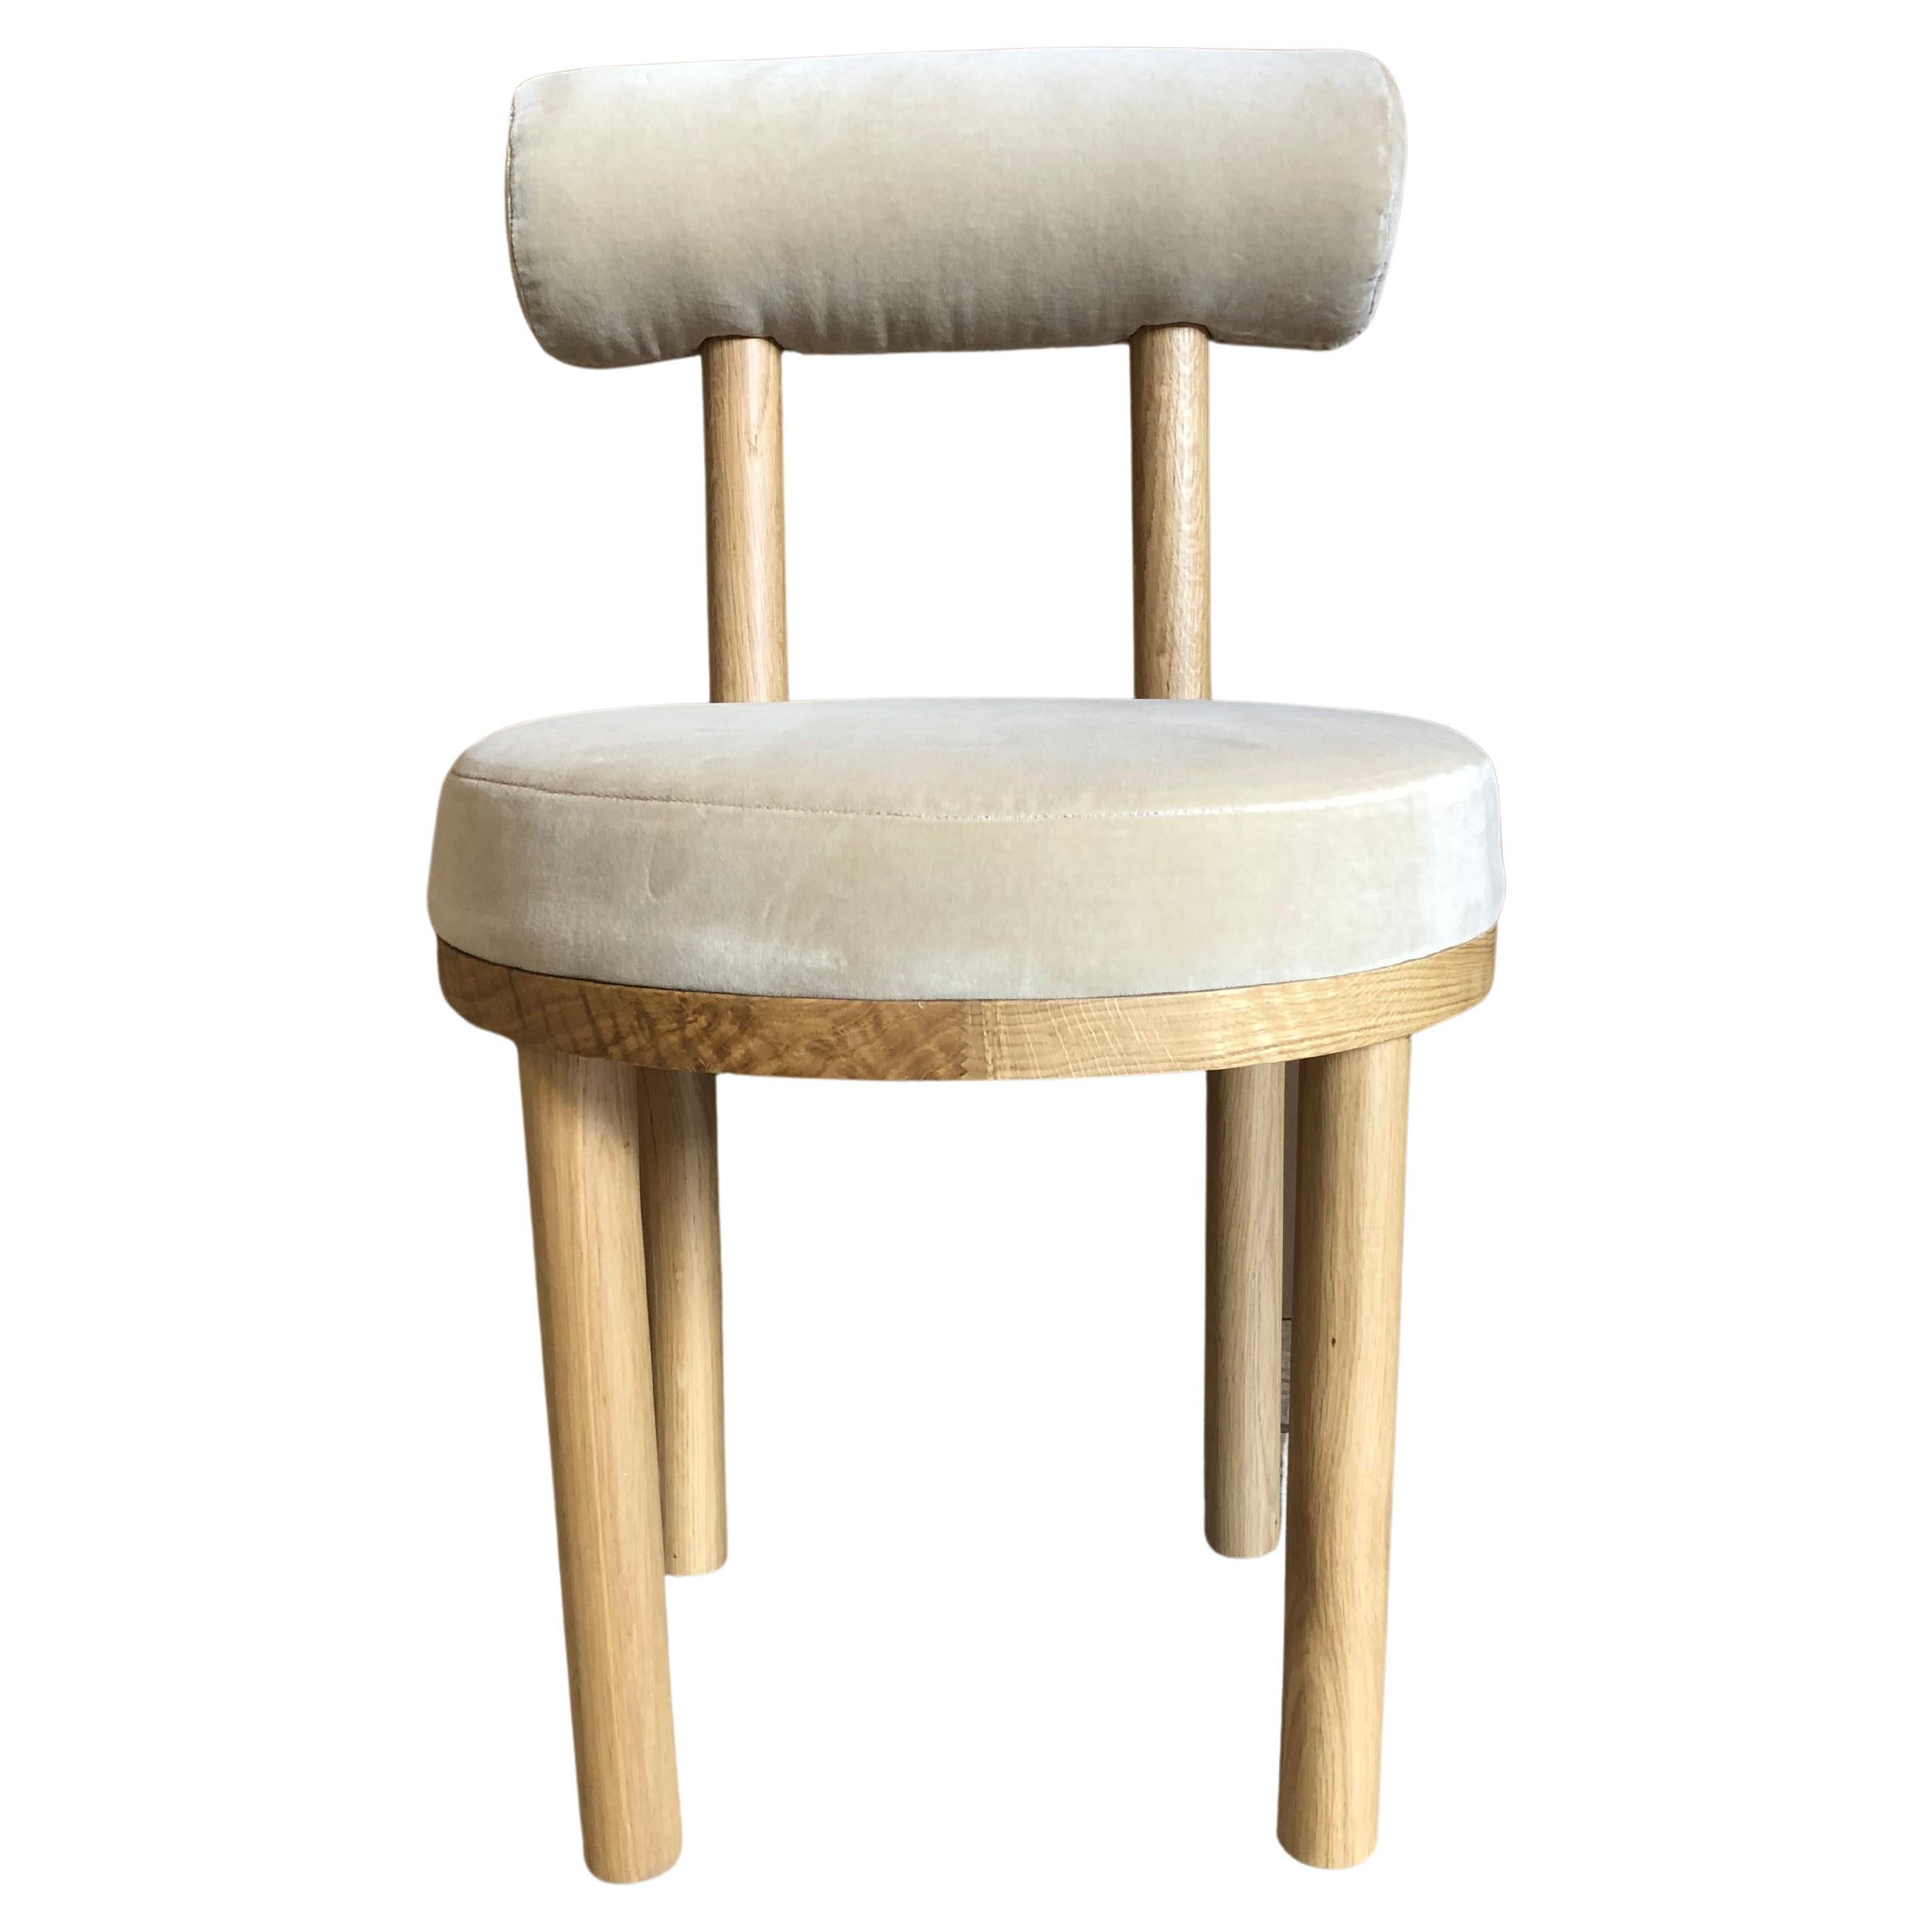 Contemporary Modern Moca Chair in Oak & Beige Velvet Fabric by Collector Studio For Sale